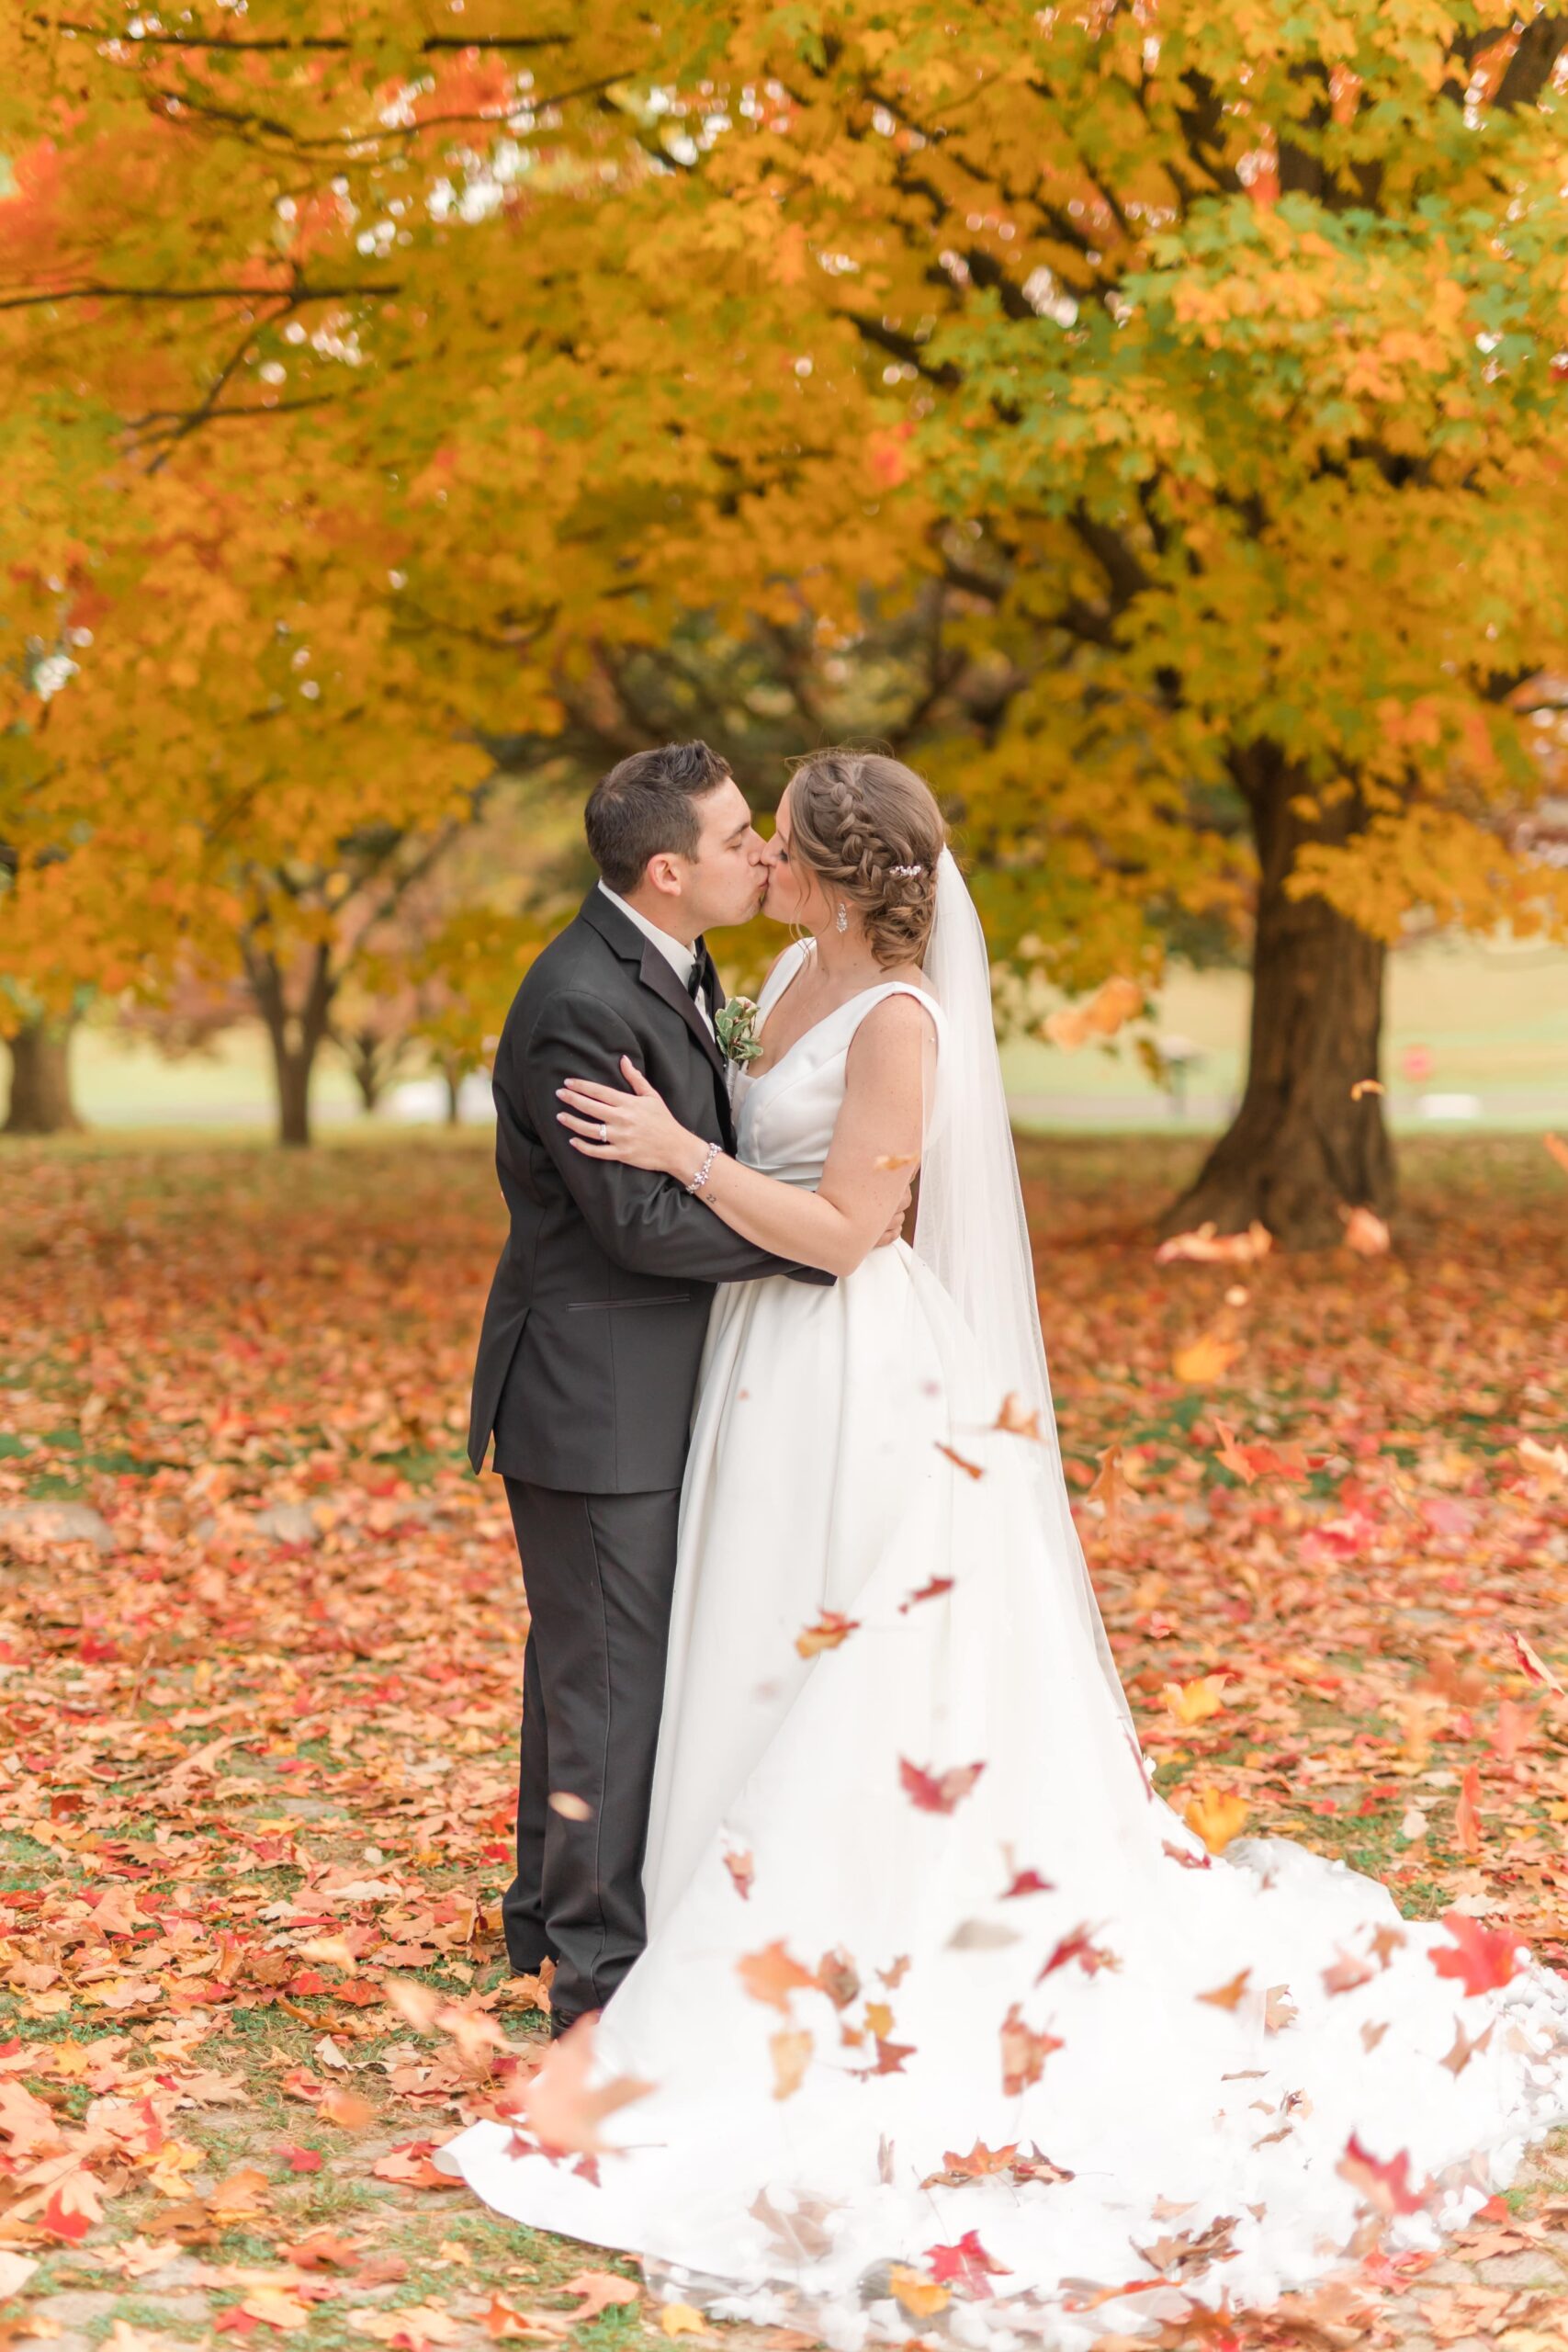 Bride and groom kissing in autumn leaves